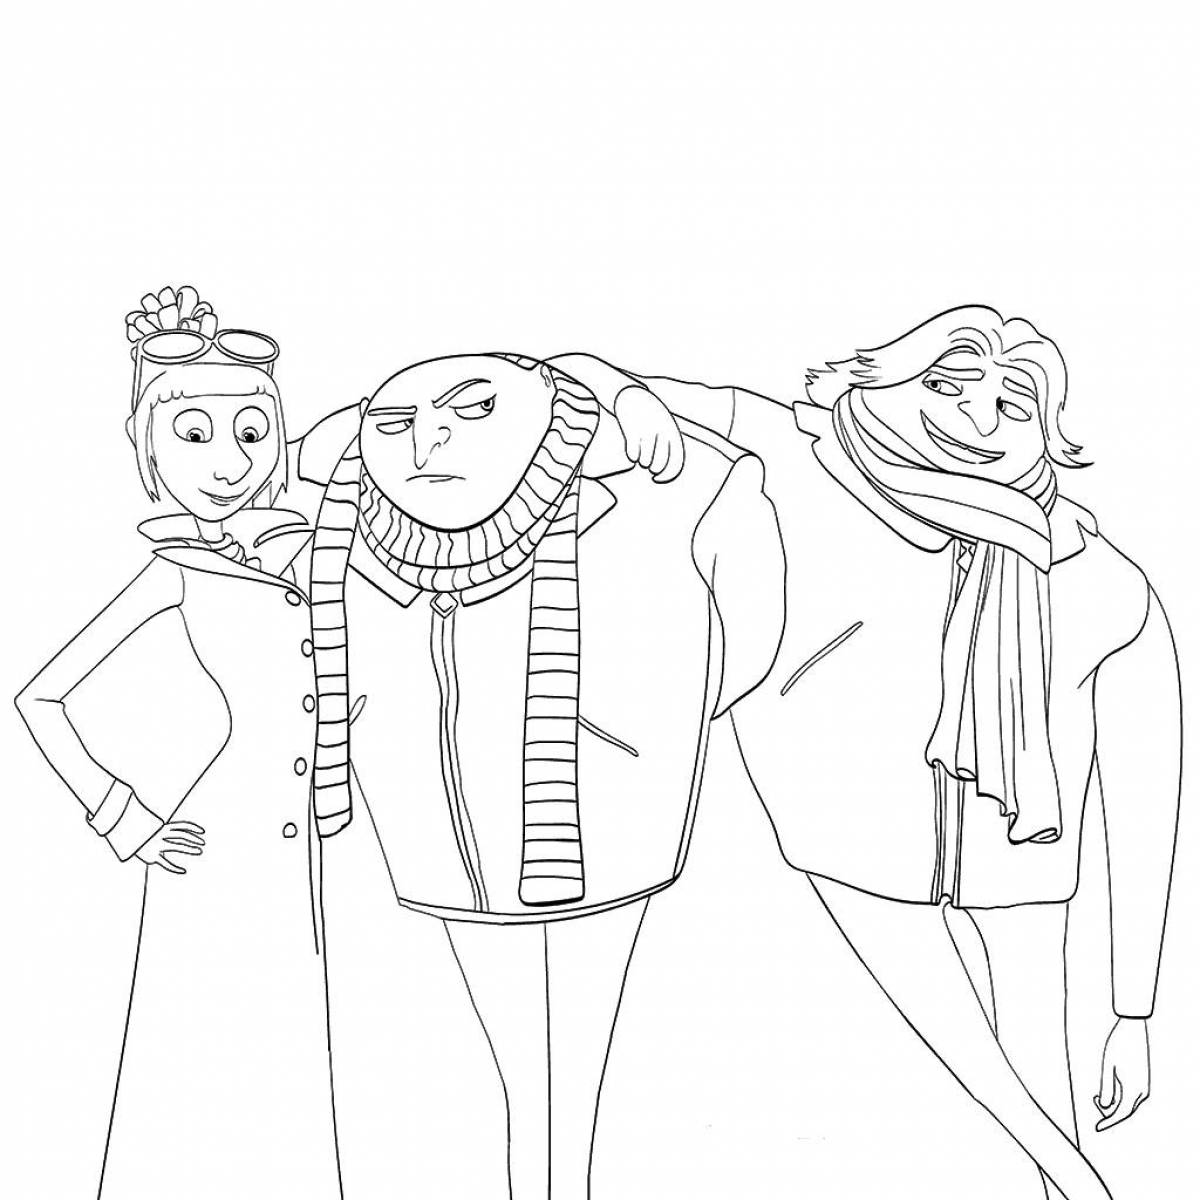 Coloring pages despicable me 3